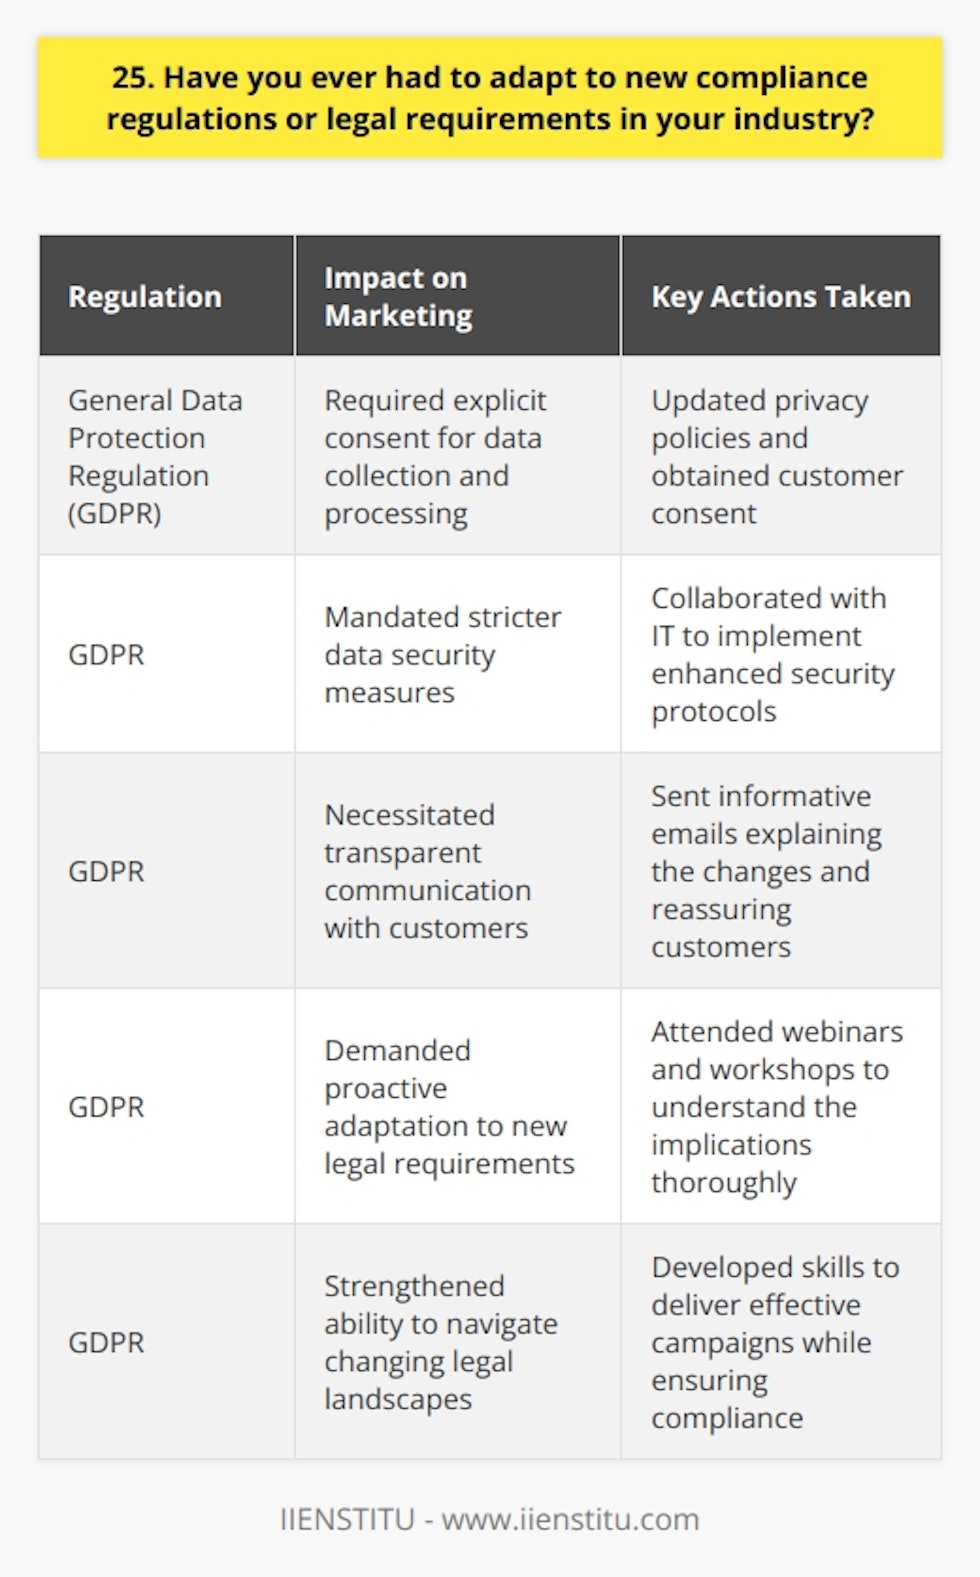 As a marketing professional, Ive had to adapt to new compliance regulations and legal requirements several times throughout my career. One memorable instance was when the General Data Protection Regulation (GDPR) came into effect in the European Union. Understanding the New Regulations When the GDPR was introduced, I took the time to thoroughly read and understand the new requirements. I attended webinars and workshops to ensure I had a solid grasp of the implications for our marketing strategies. Collaborating with Legal and IT Teams I worked closely with our legal and IT departments to assess how the GDPR would impact our data collection and processing practices. Together, we identified areas that needed to be updated to ensure compliance. Implementing Changes in Marketing Strategies Based on our findings, I led the effort to revise our marketing campaigns and data management processes. We updated our privacy policies, obtained explicit consent from customers, and implemented stricter data security measures. Communicating with Customers I also ensured that we communicated the changes to our customers transparently. We sent out emails explaining the updates and reassured them that their data privacy was our top priority. Staying Proactive and Adaptable Throughout the process, I learned the importance of staying proactive and adaptable in the face of new regulations. By being willing to learn, collaborate with other teams, and make necessary adjustments, I was able to successfully navigate the challenges posed by the GDPR. This experience strengthened my ability to adapt to changing legal landscapes while still delivering effective marketing campaigns. Its a skill I continue to apply as new regulations emerge in our industry.